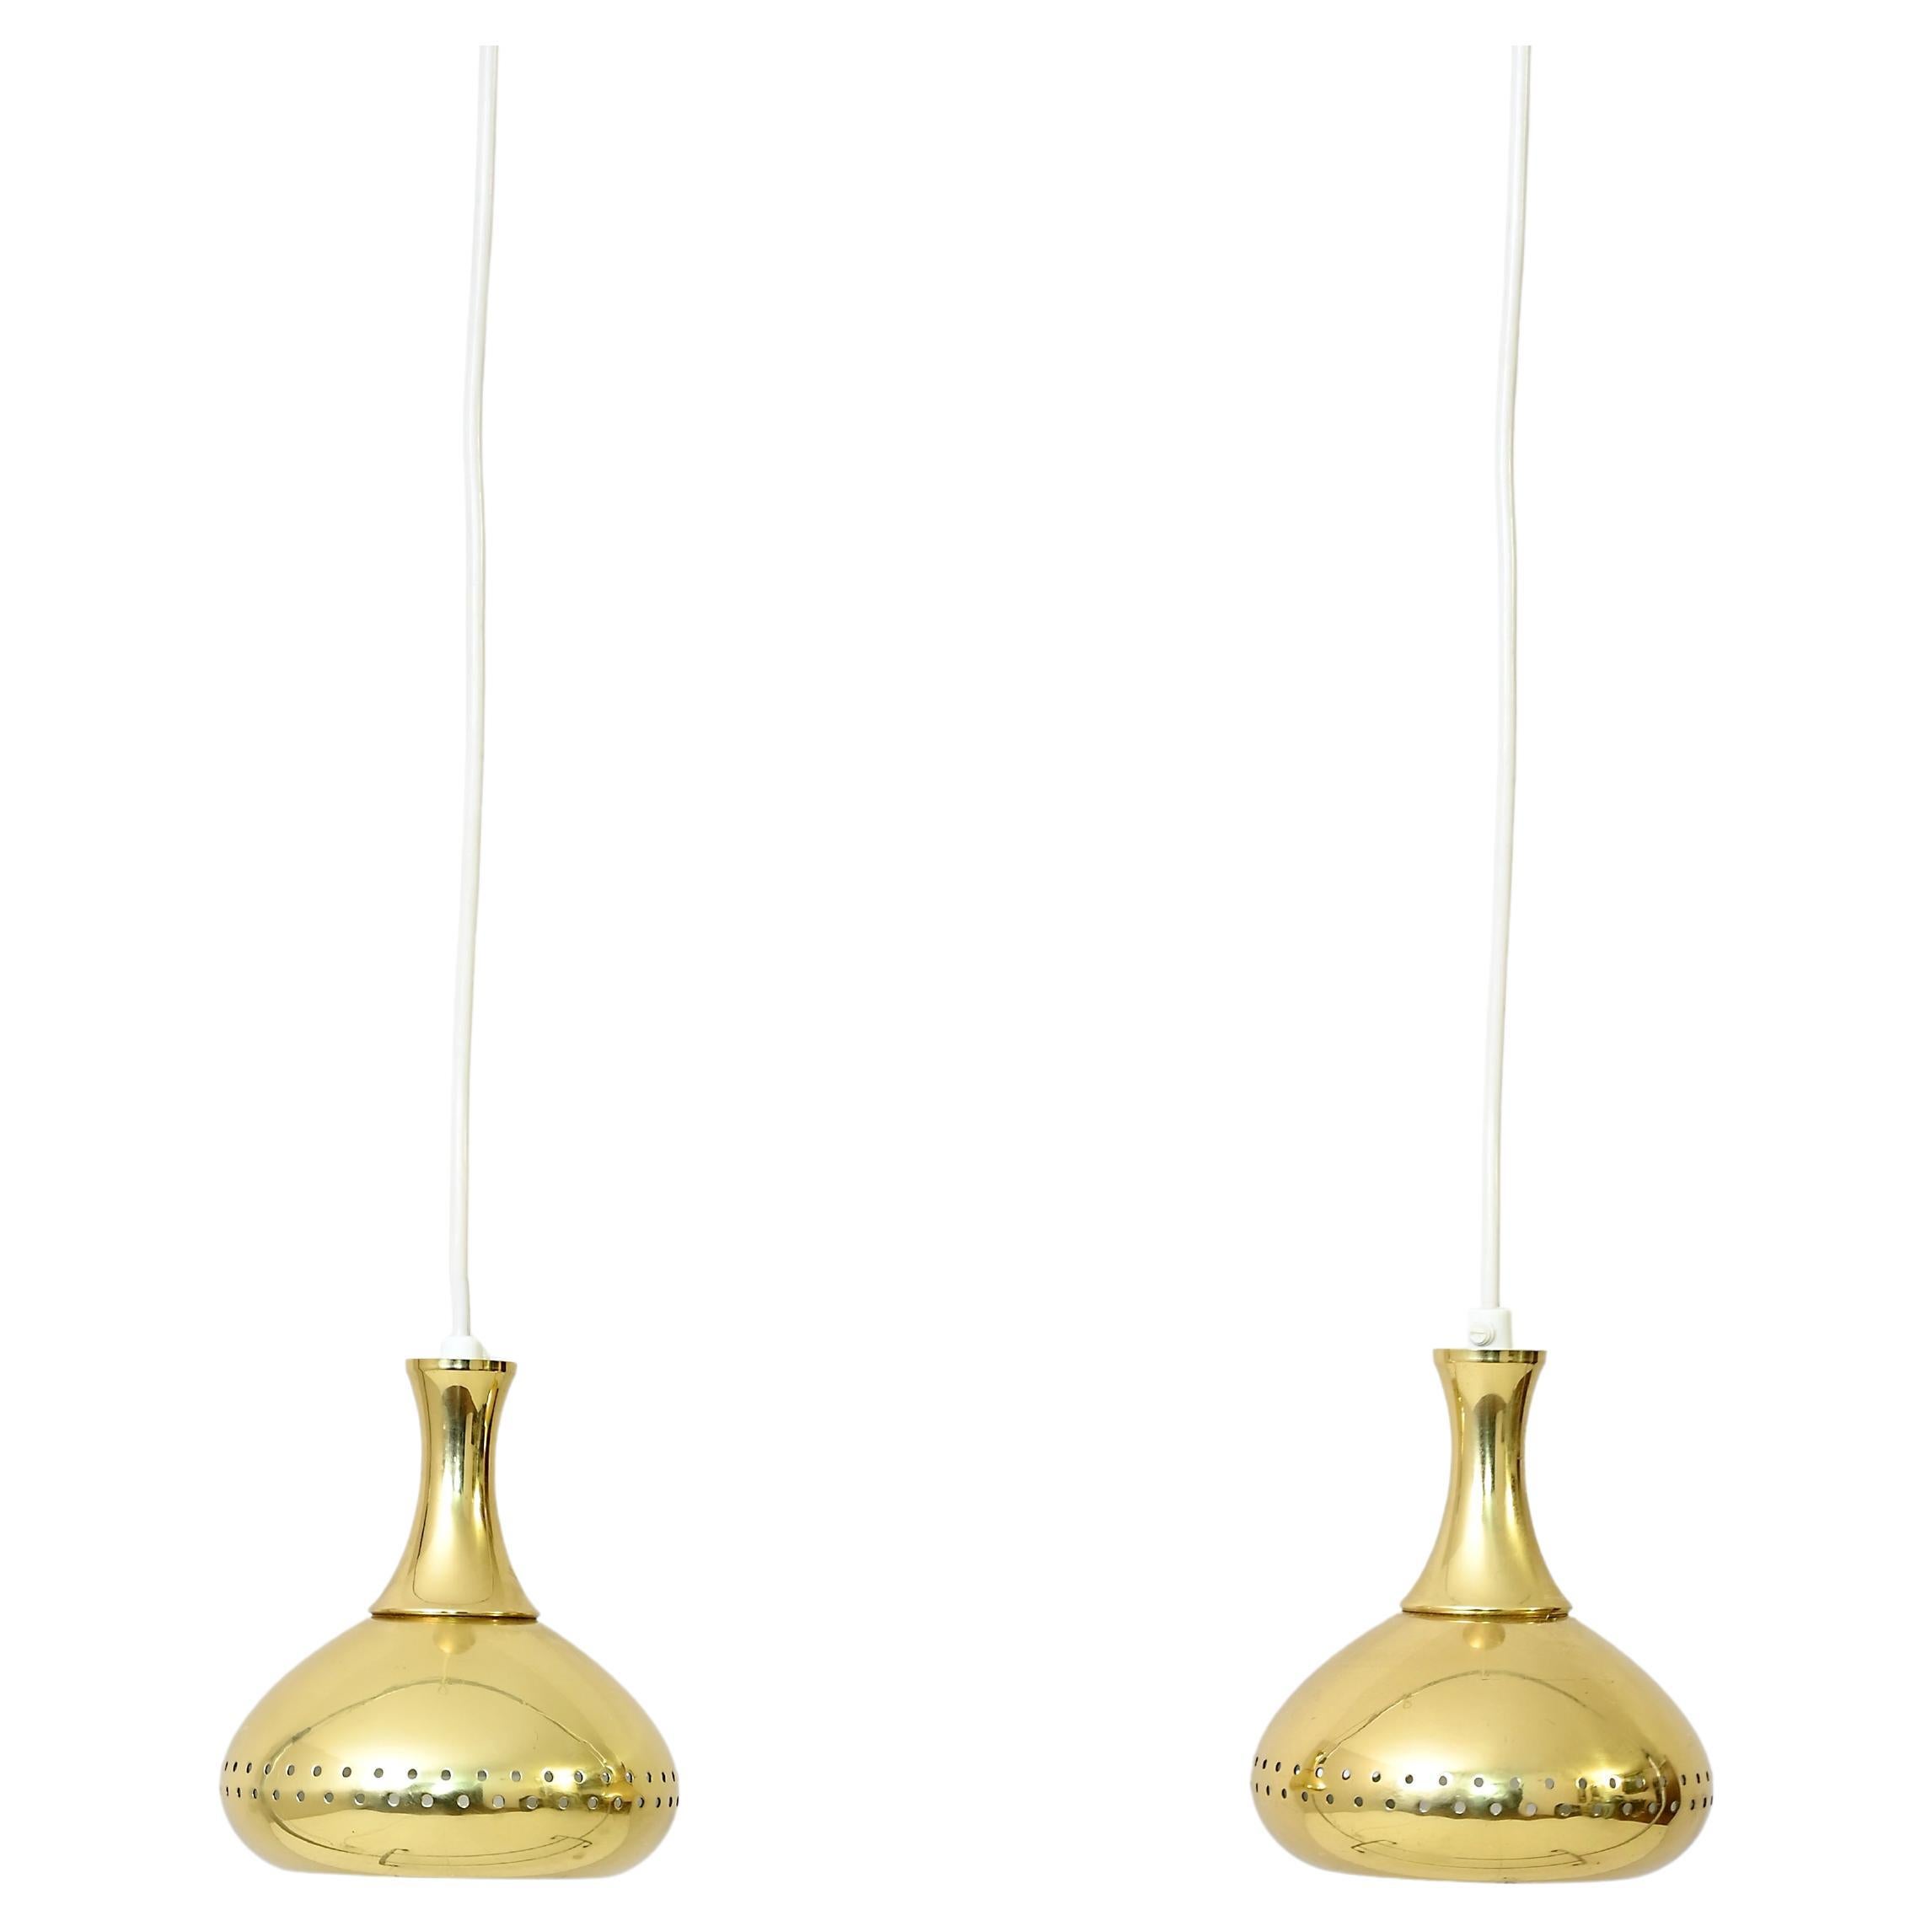 Pair of Pendant Lamps by Hans-Agne Jakobsson for Markaryd